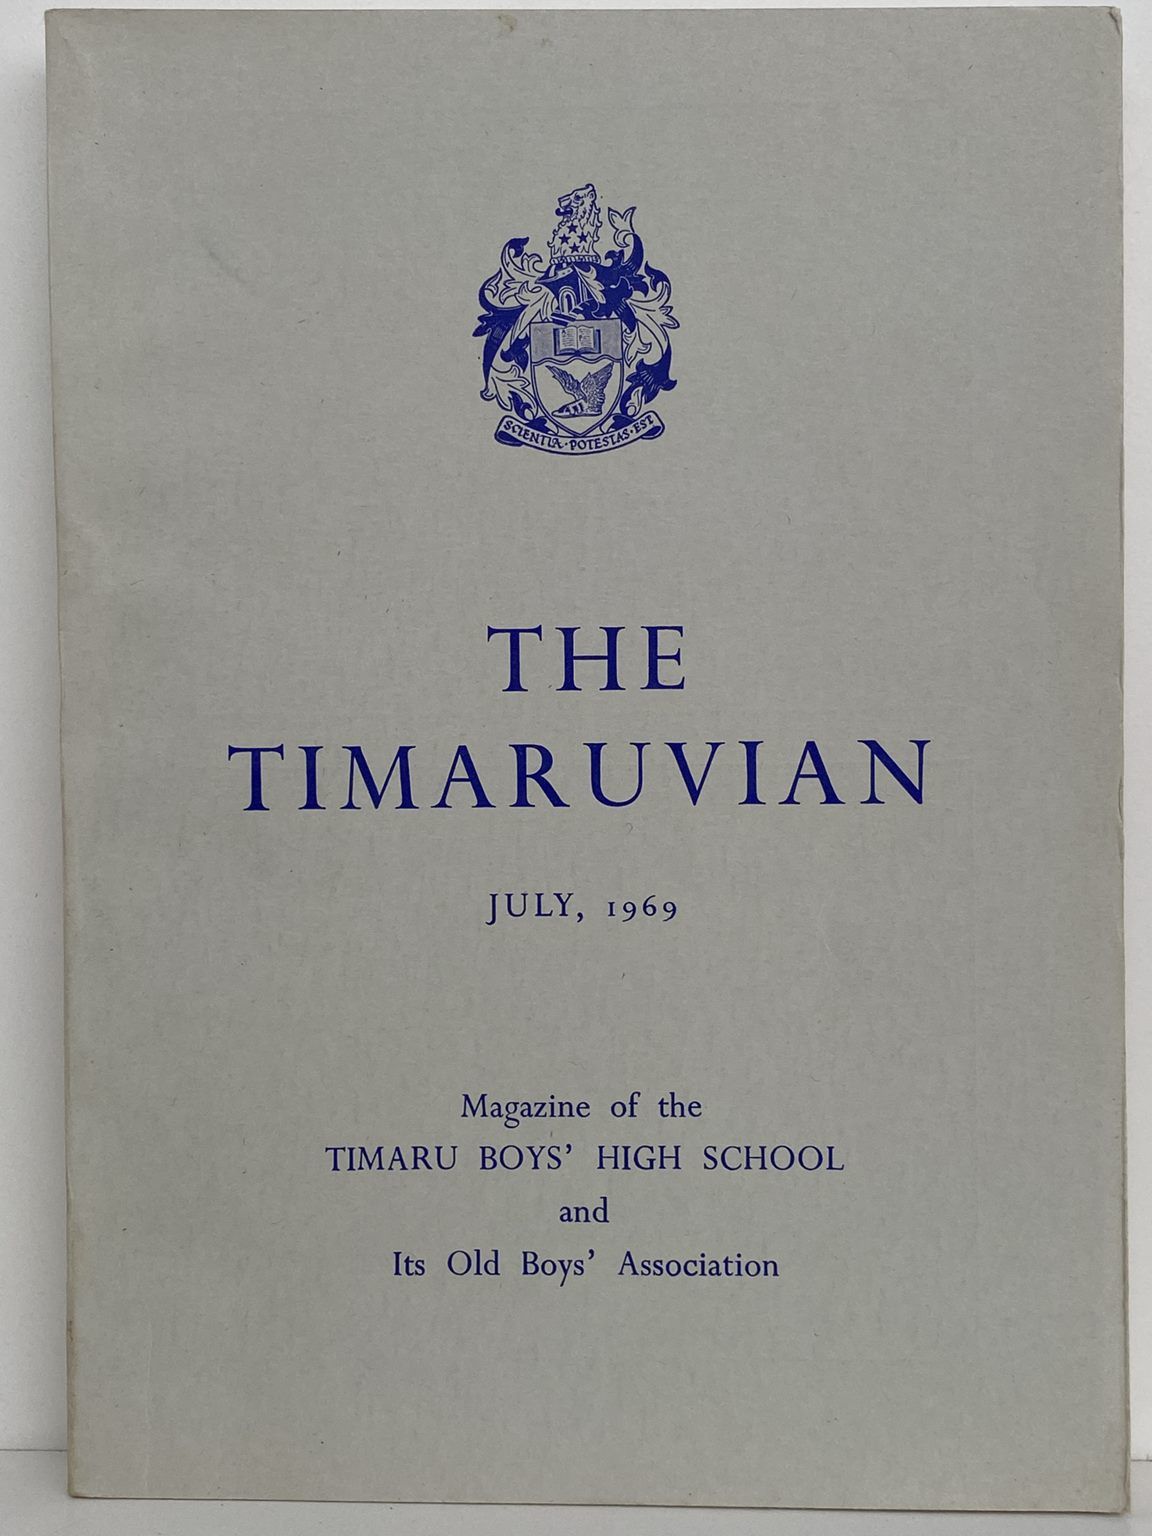 THE TIMARUVIAN: Magazine of the Timaru Boys' High School and its Old Boys' Association 1969